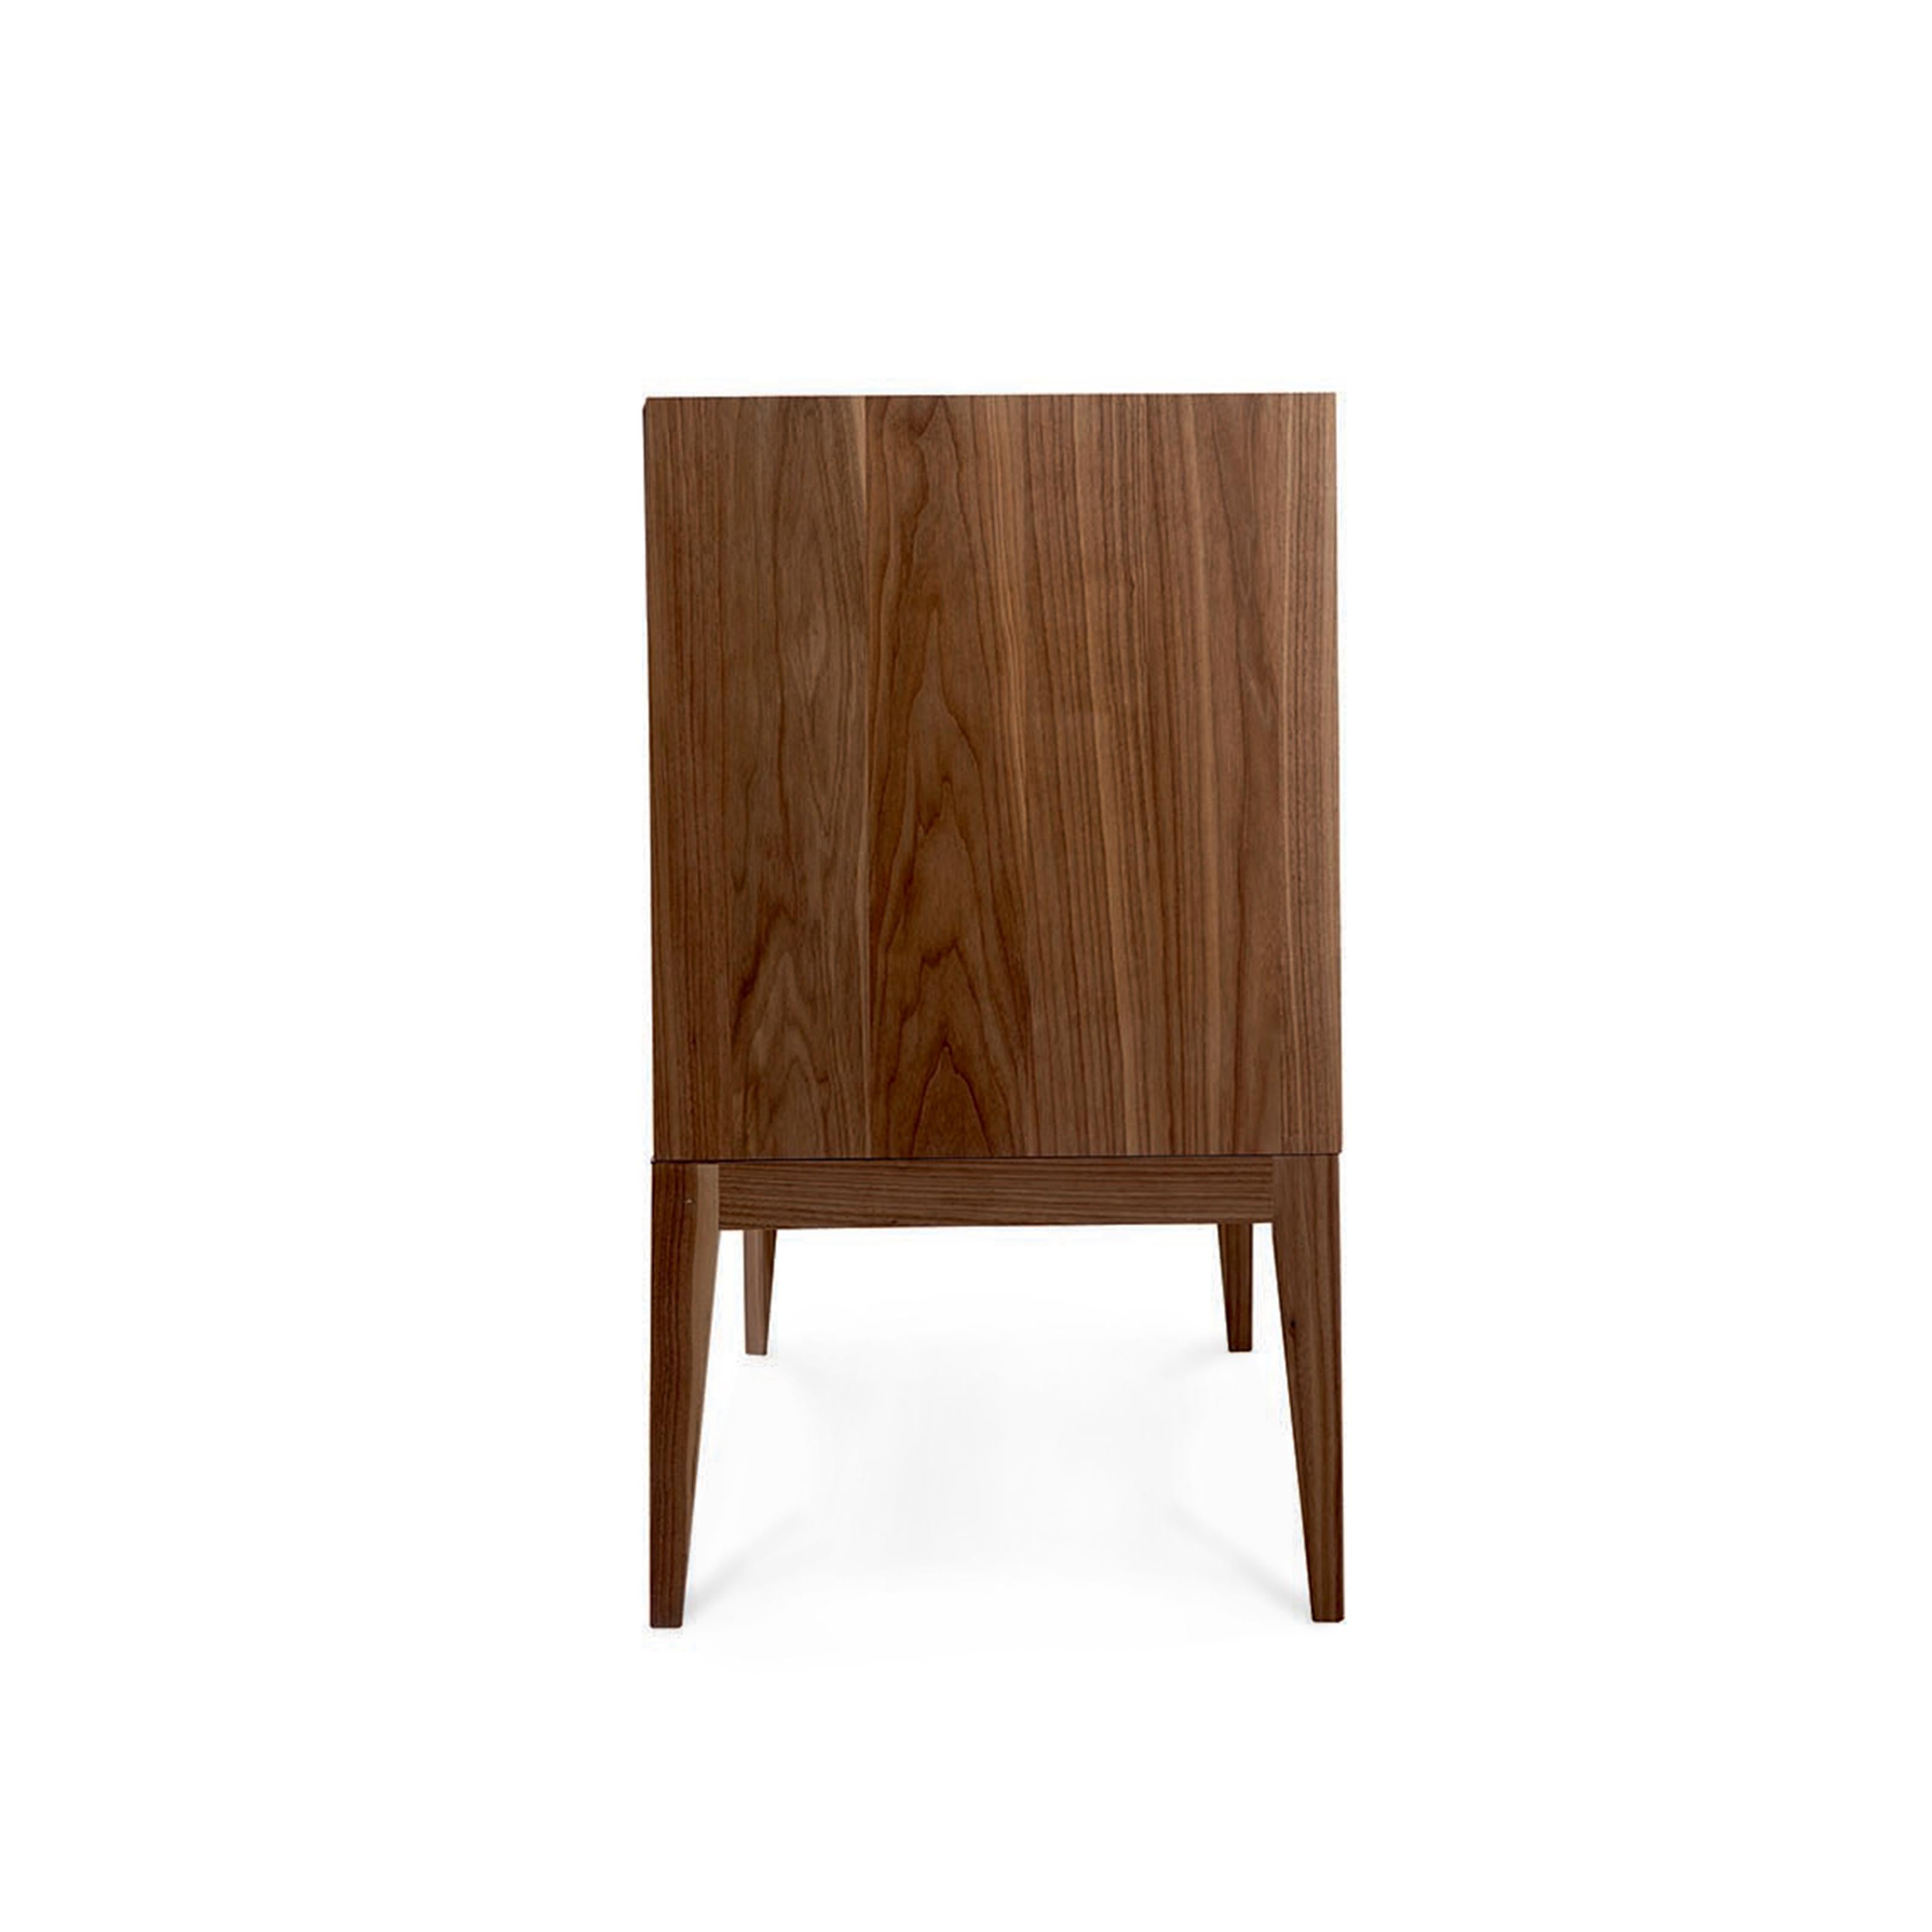 Modern Eleva Solid Wood Sideboard, Walnut in Hand-Made Natural Finish, Contemporary For Sale